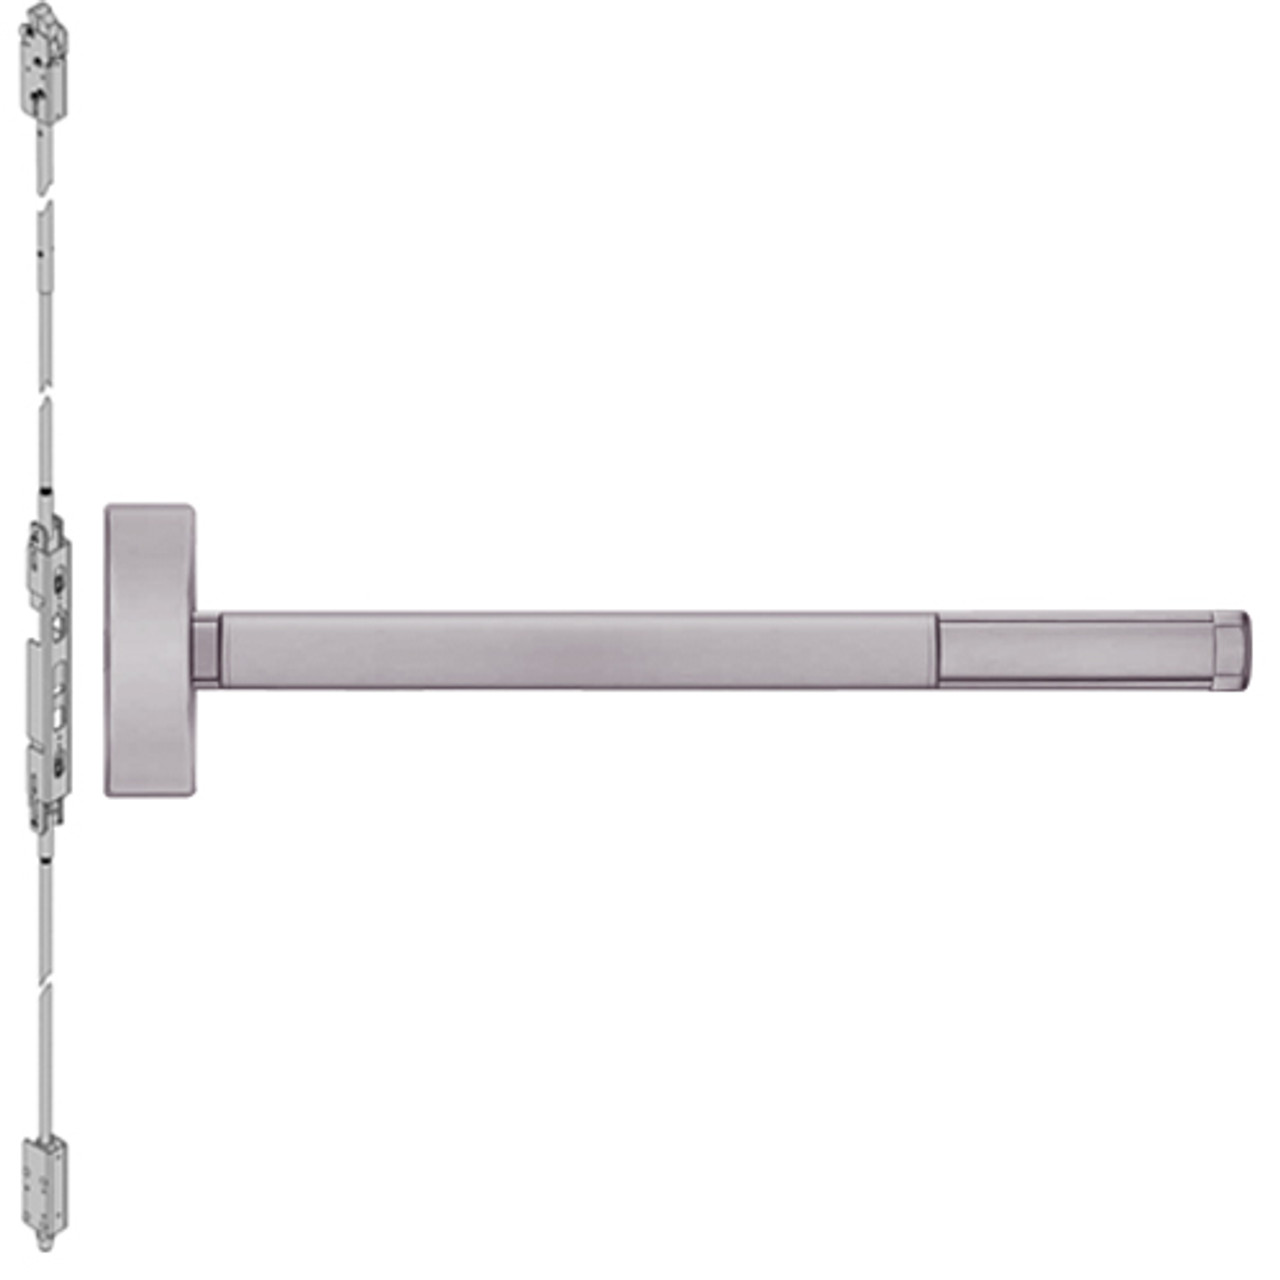 ELR2805LBR-630-36 PHI 2800 Series Concealed Vertical Rod Exit Device with Electric Latch Retraction Prepped for Key Controls Thumb Piece in Satin Stainless Steel Finish